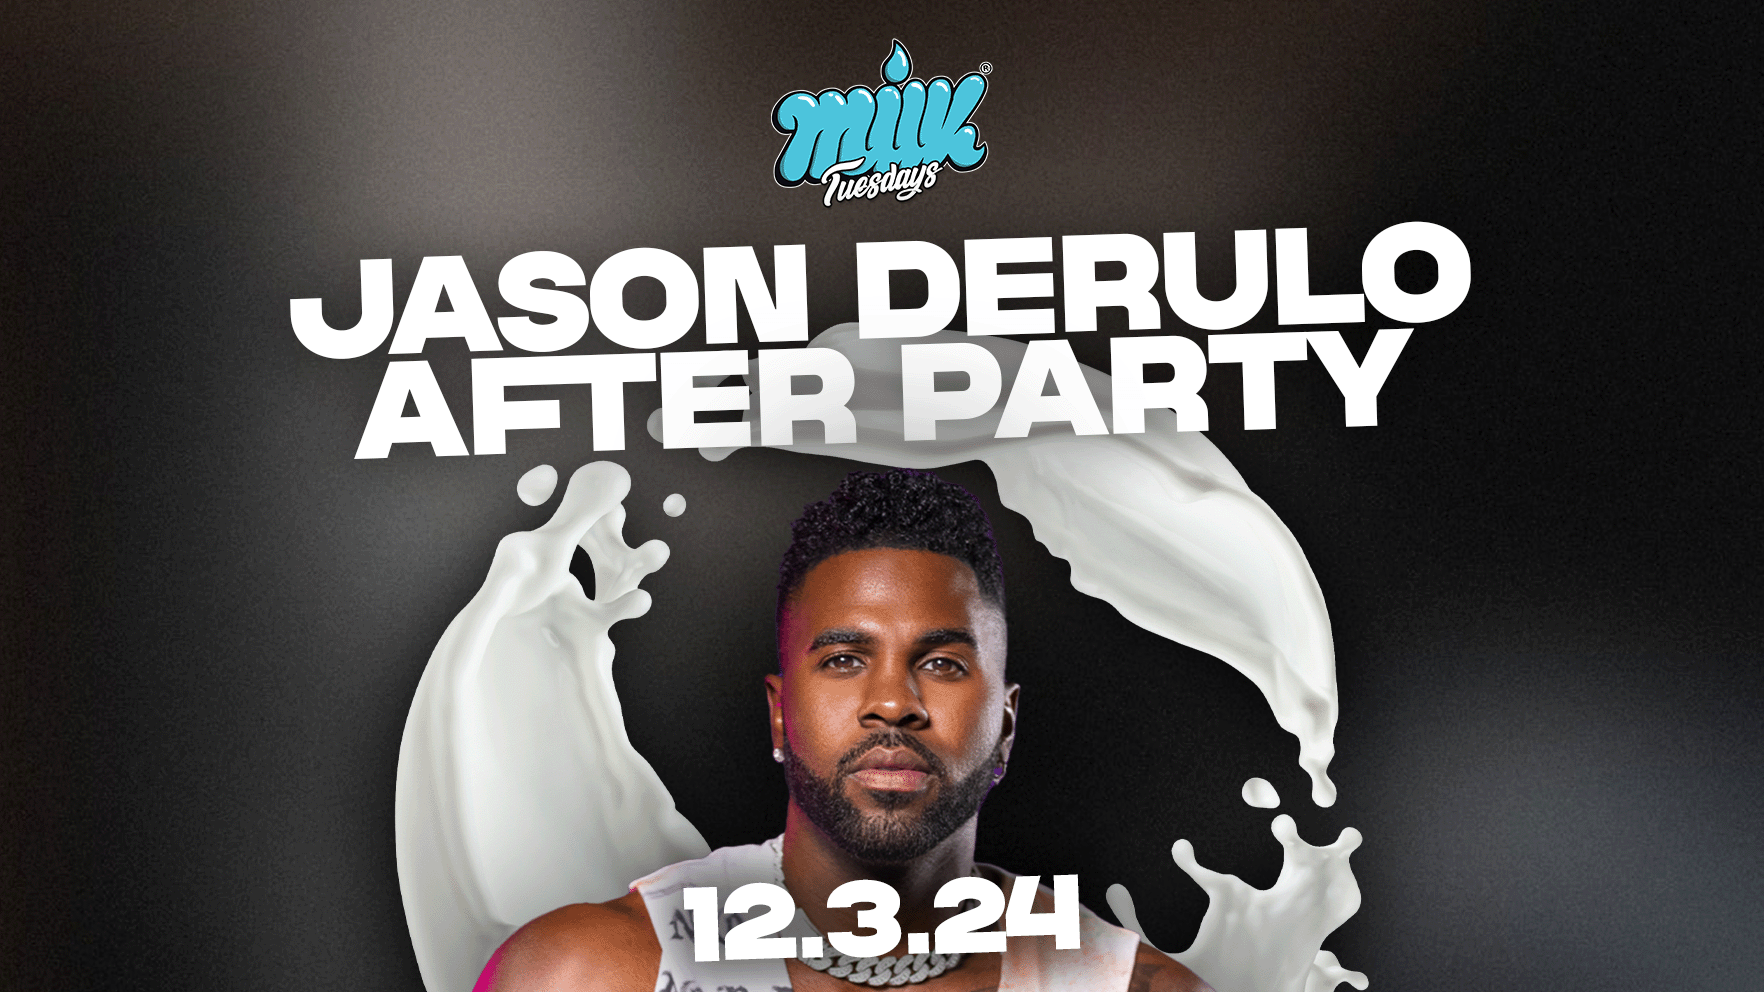 MILK TUESDAYS | JASON DERULO AFTER PARTY | 12TH MARCH